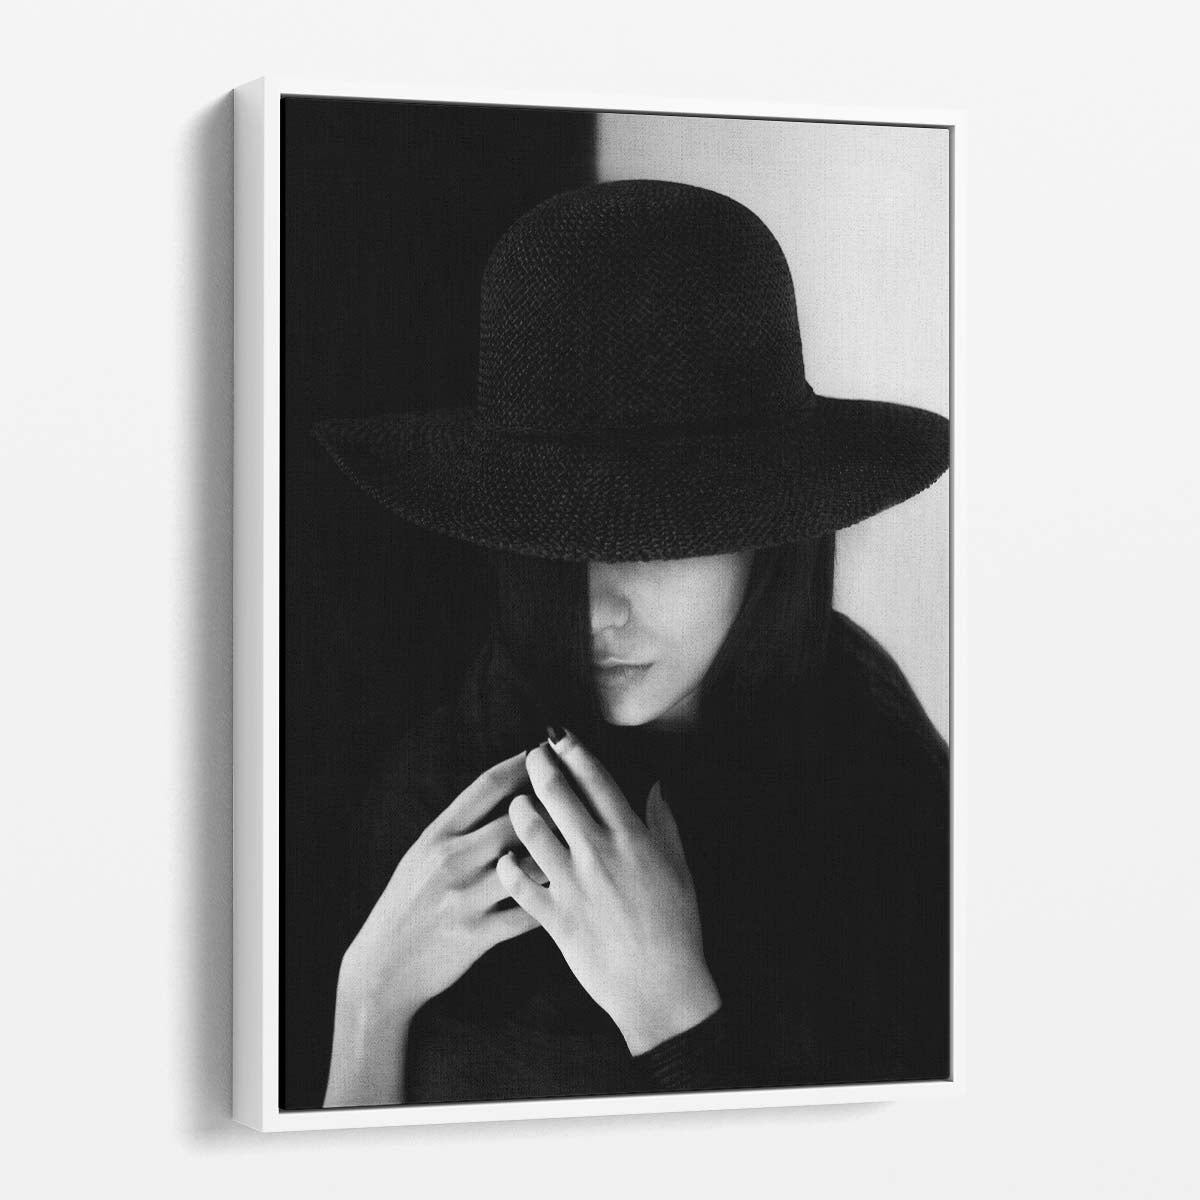 Monochrome Yin-Yang Portrait Photography of Shy Woman with Hat by Luxuriance Designs, made in USA